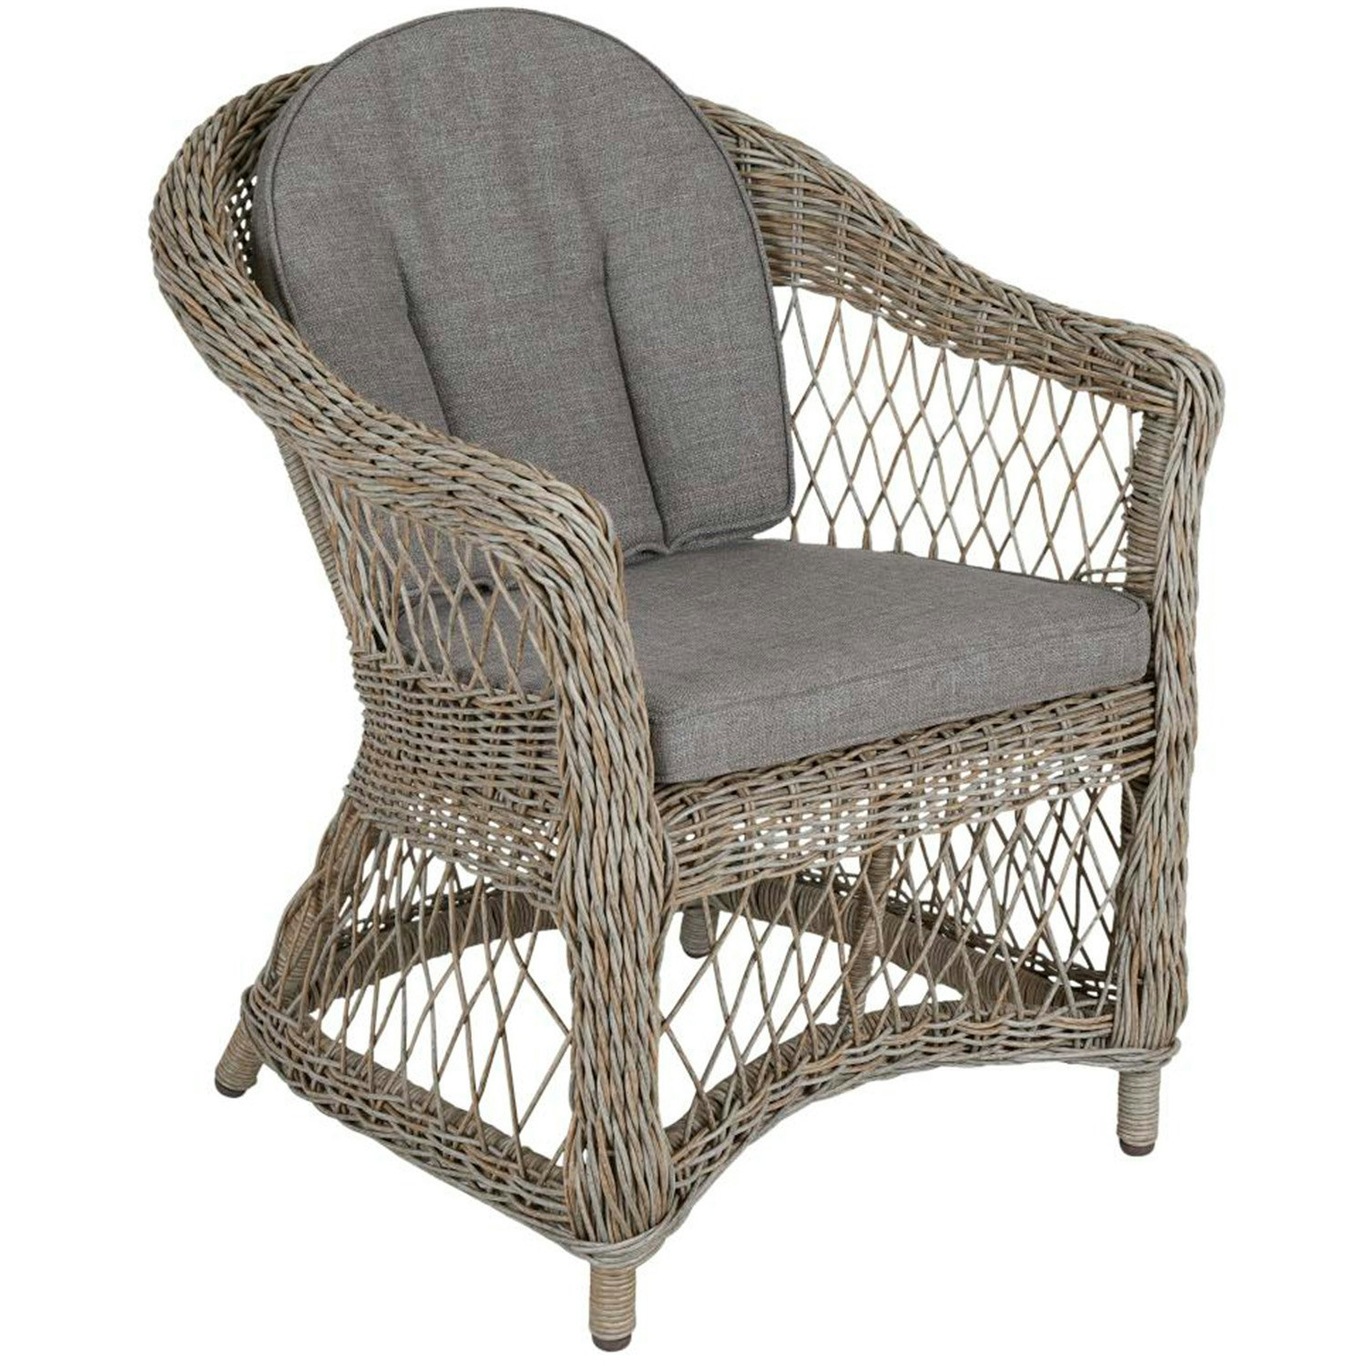 Kamomill Armchair With Cushions, Beige